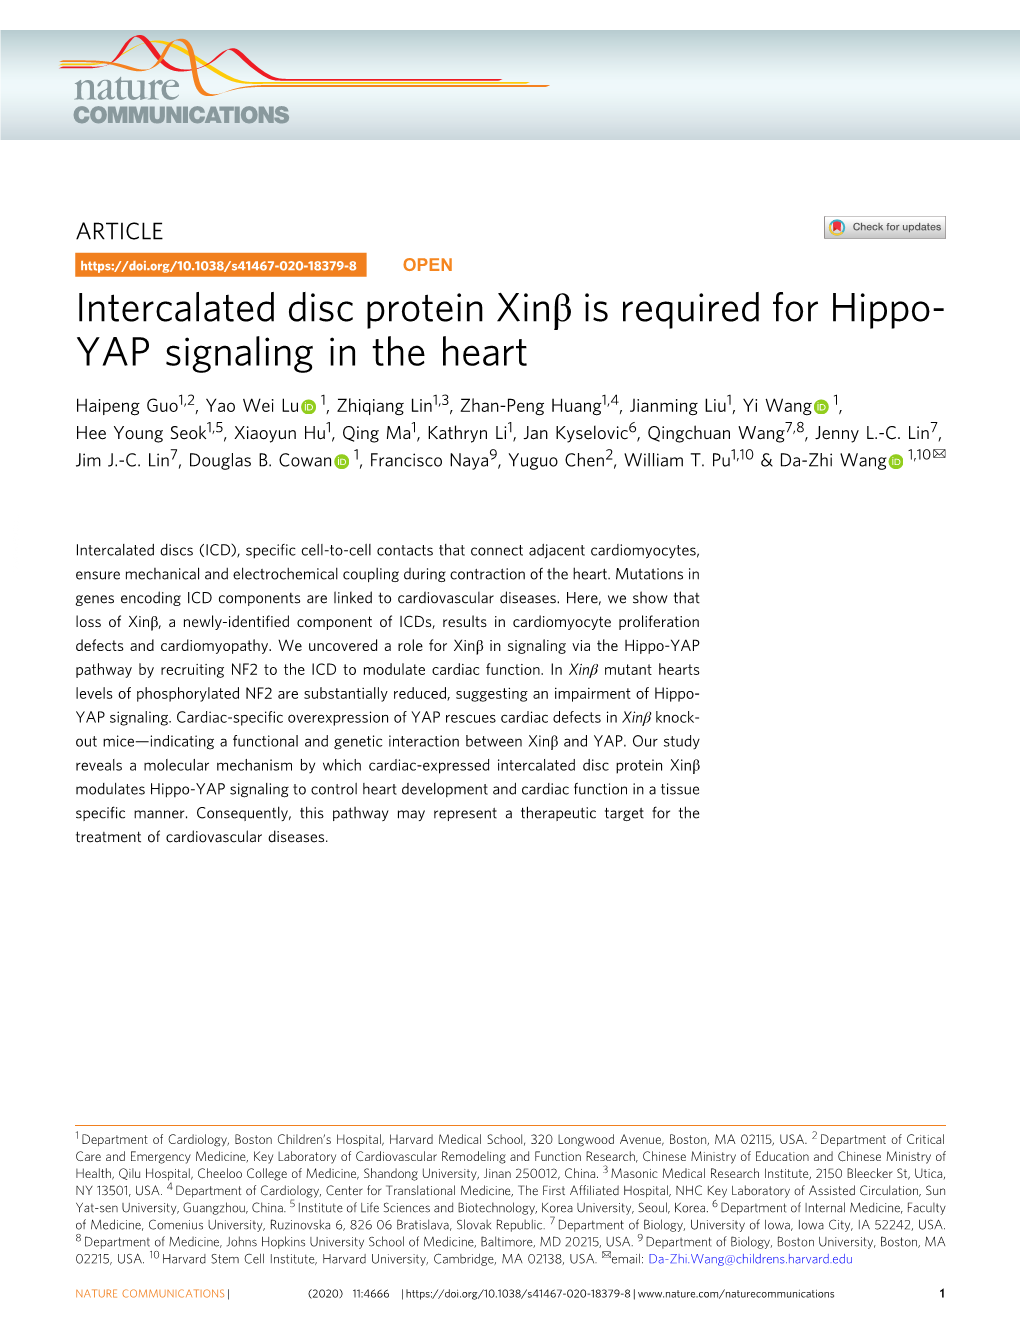 Intercalated Disc Protein Xinî² Is Required for Hippo-YAP Signaling In